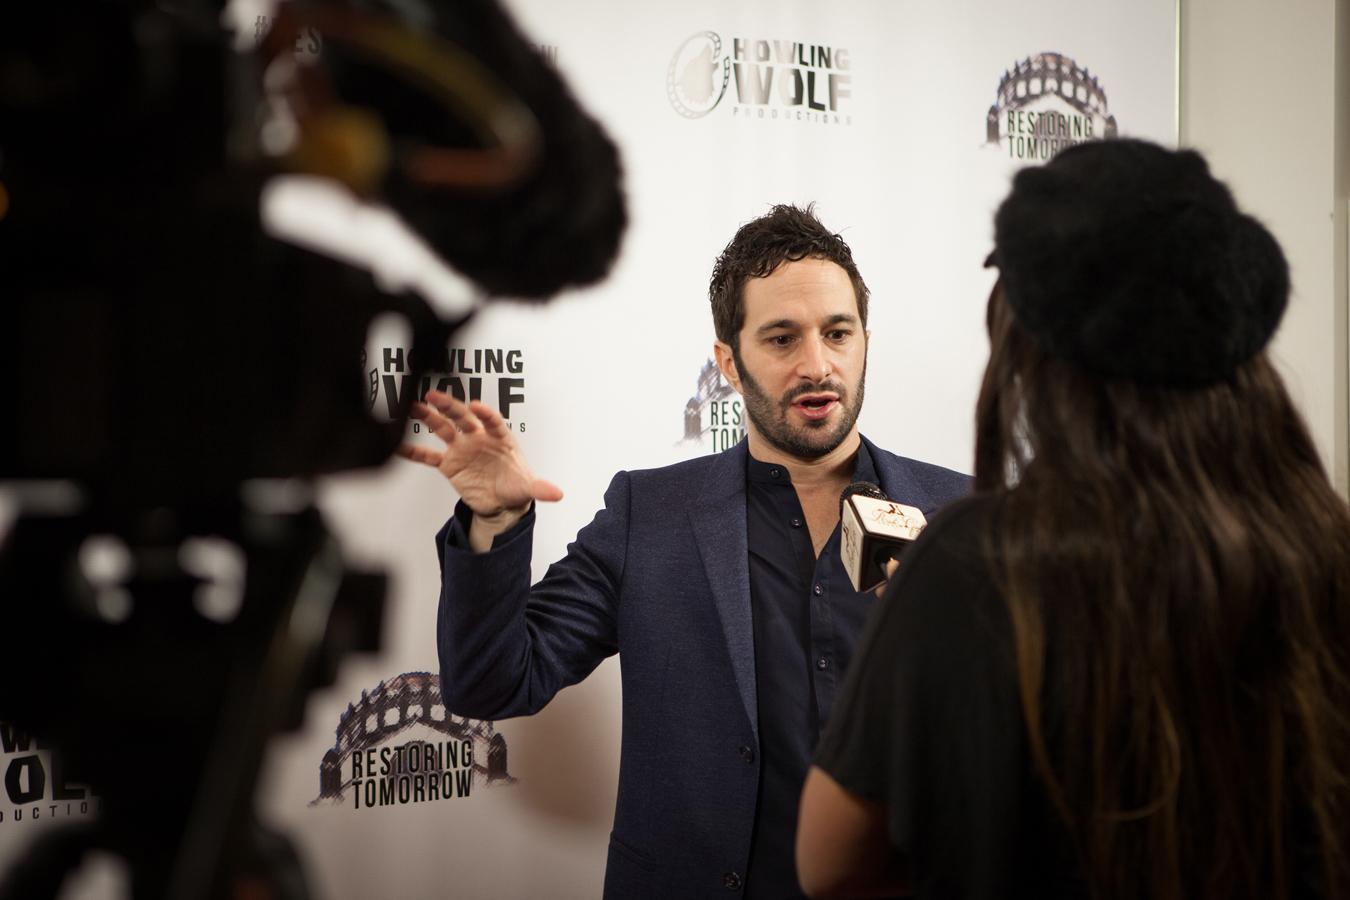 Aaron Wolf Interviewed on the Red Carpet at the Skirball Cultural Center event